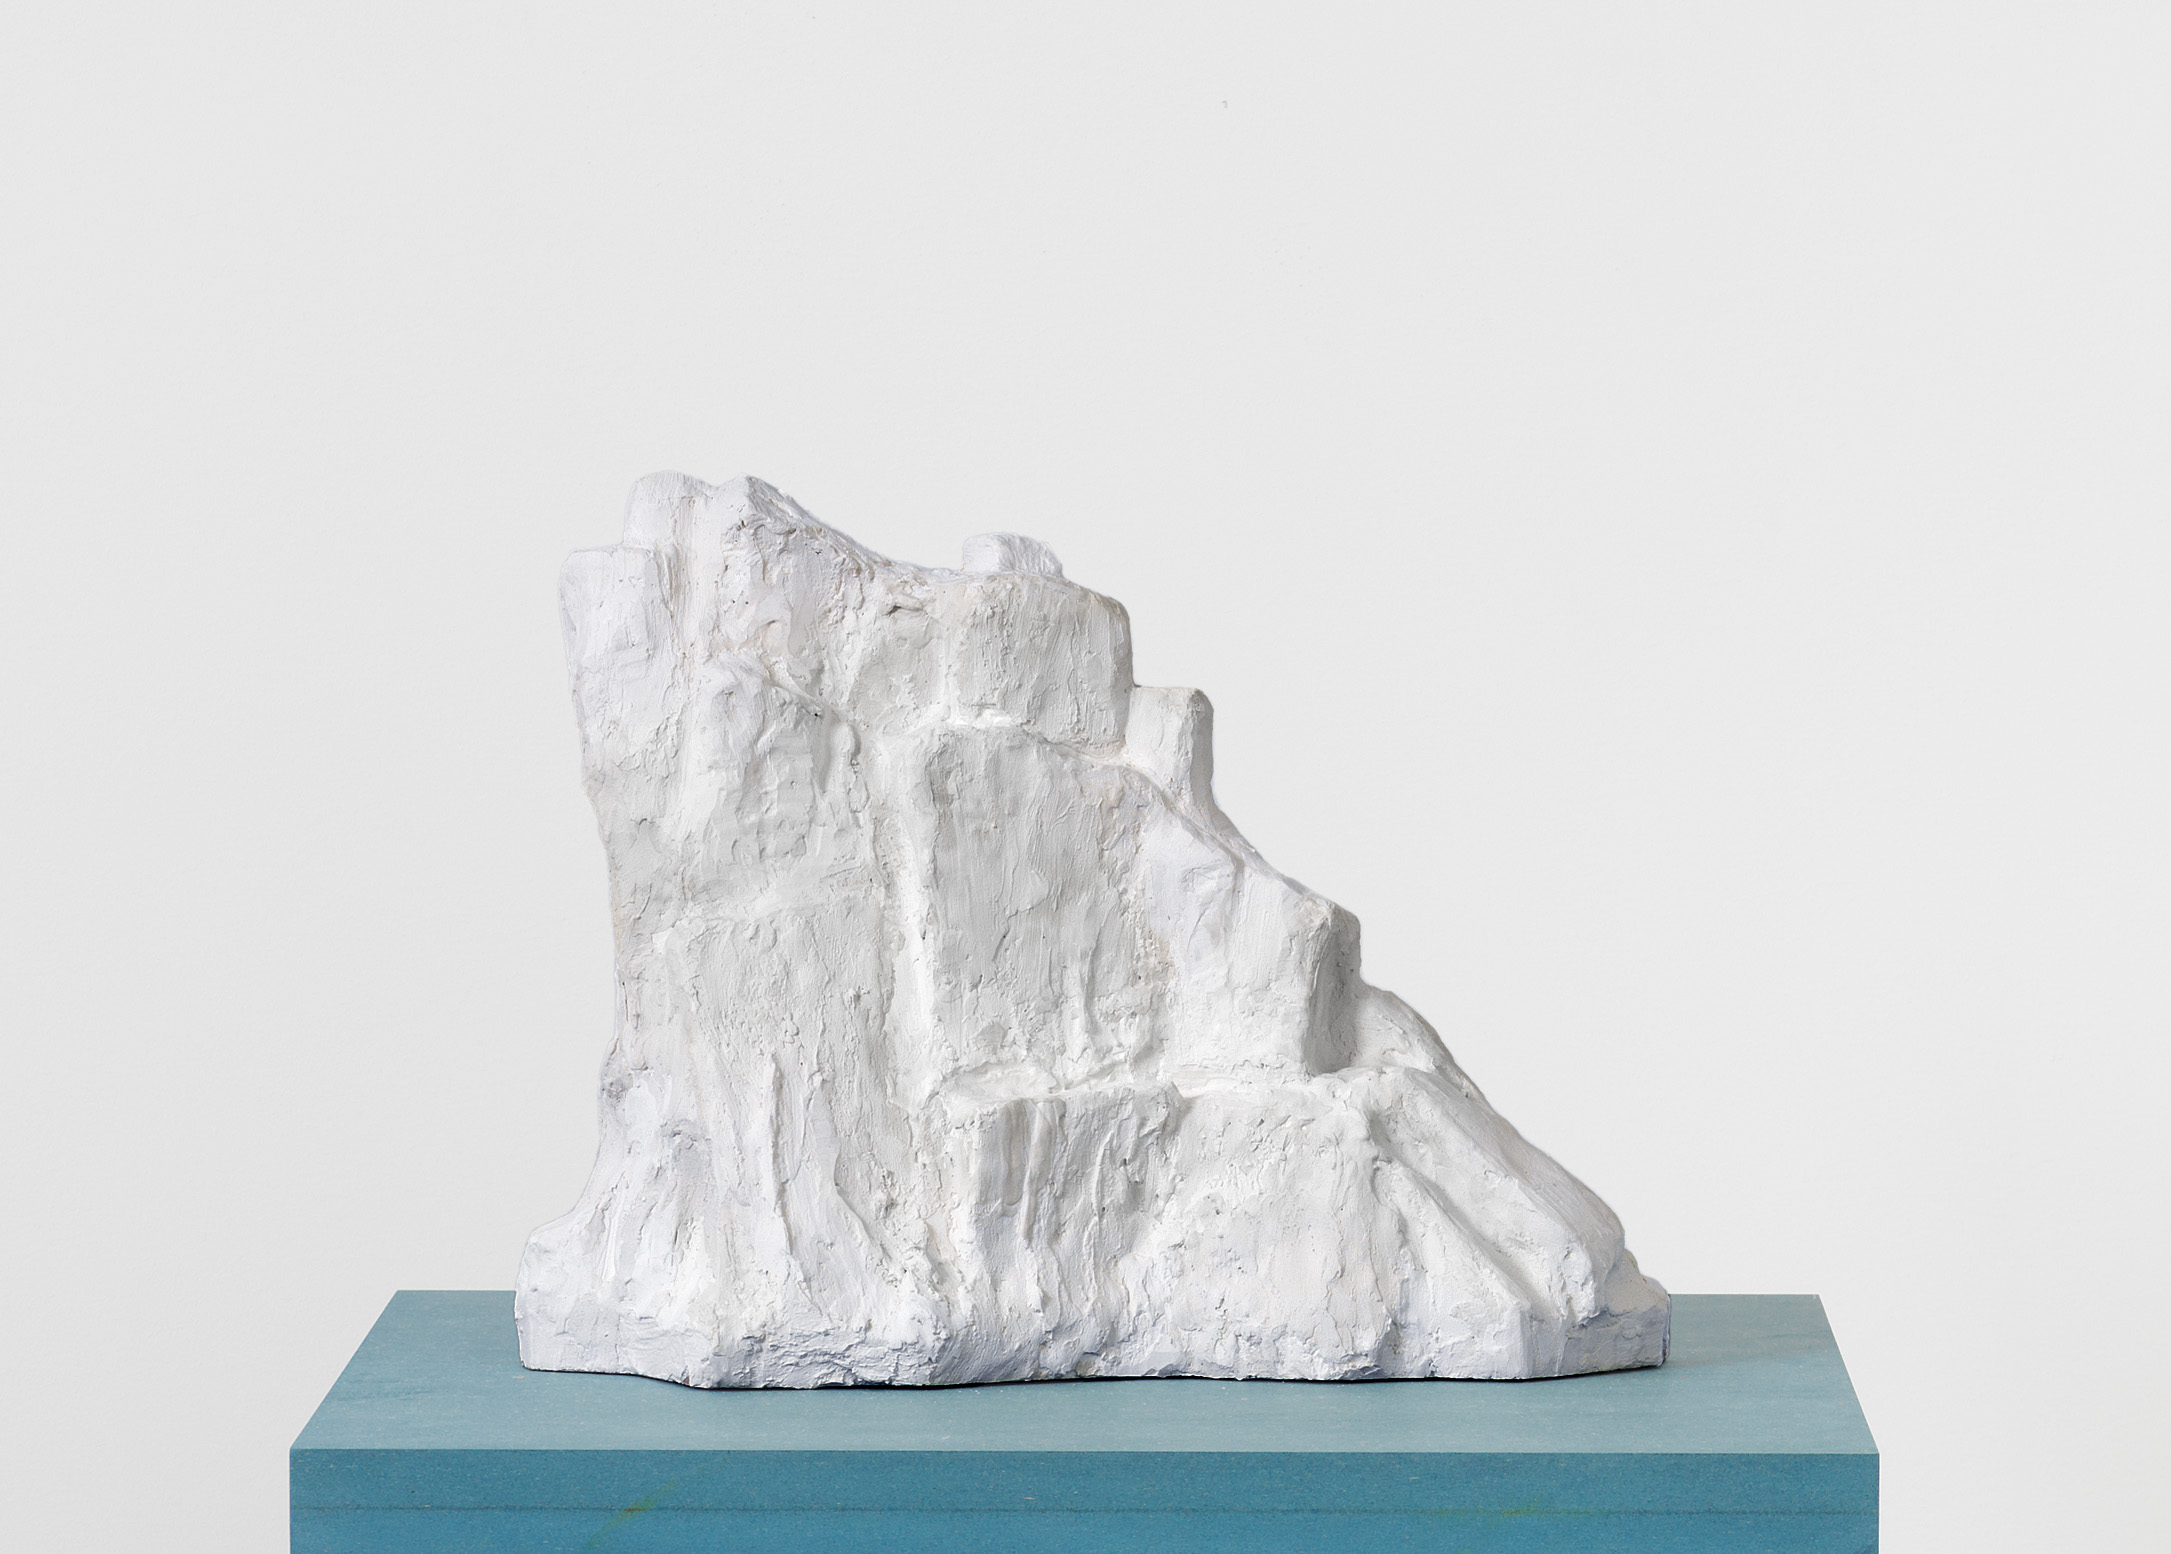 Jennifer Bolande, Drift 3, 2023, Plaster, wood, wire mesh on blue pigmented high-density composite plinth and base, 57 x 20 x 20 in.